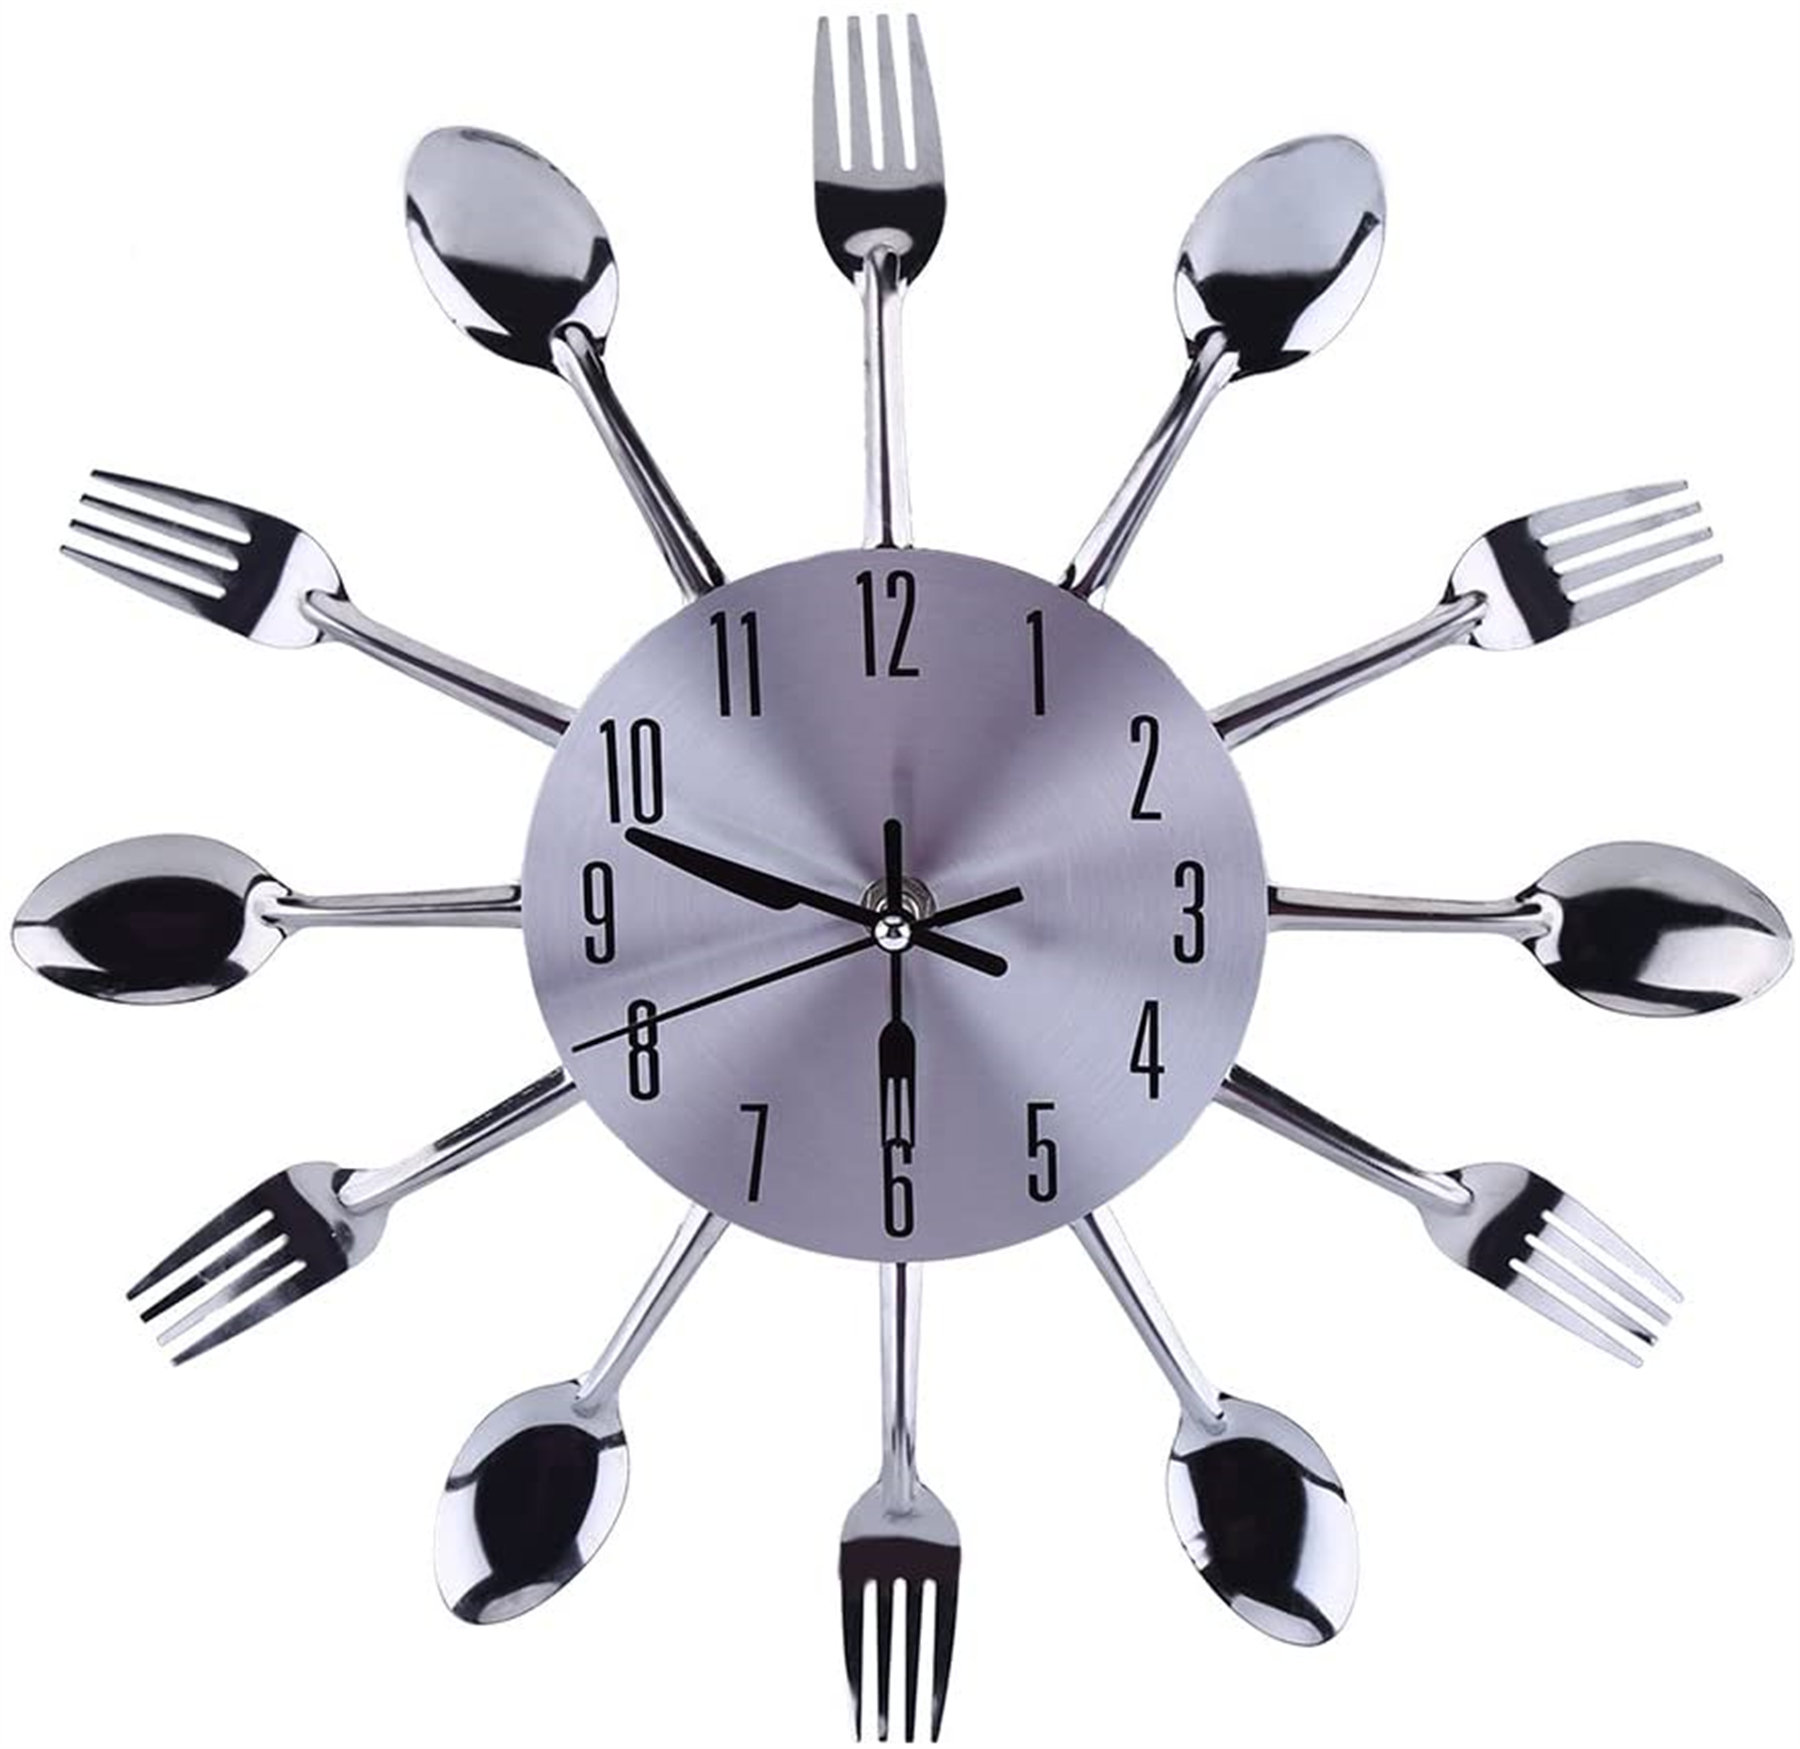 Kitchen Wall Clock Spoon Fork Wall Wall Sticker Room Home Decoration 